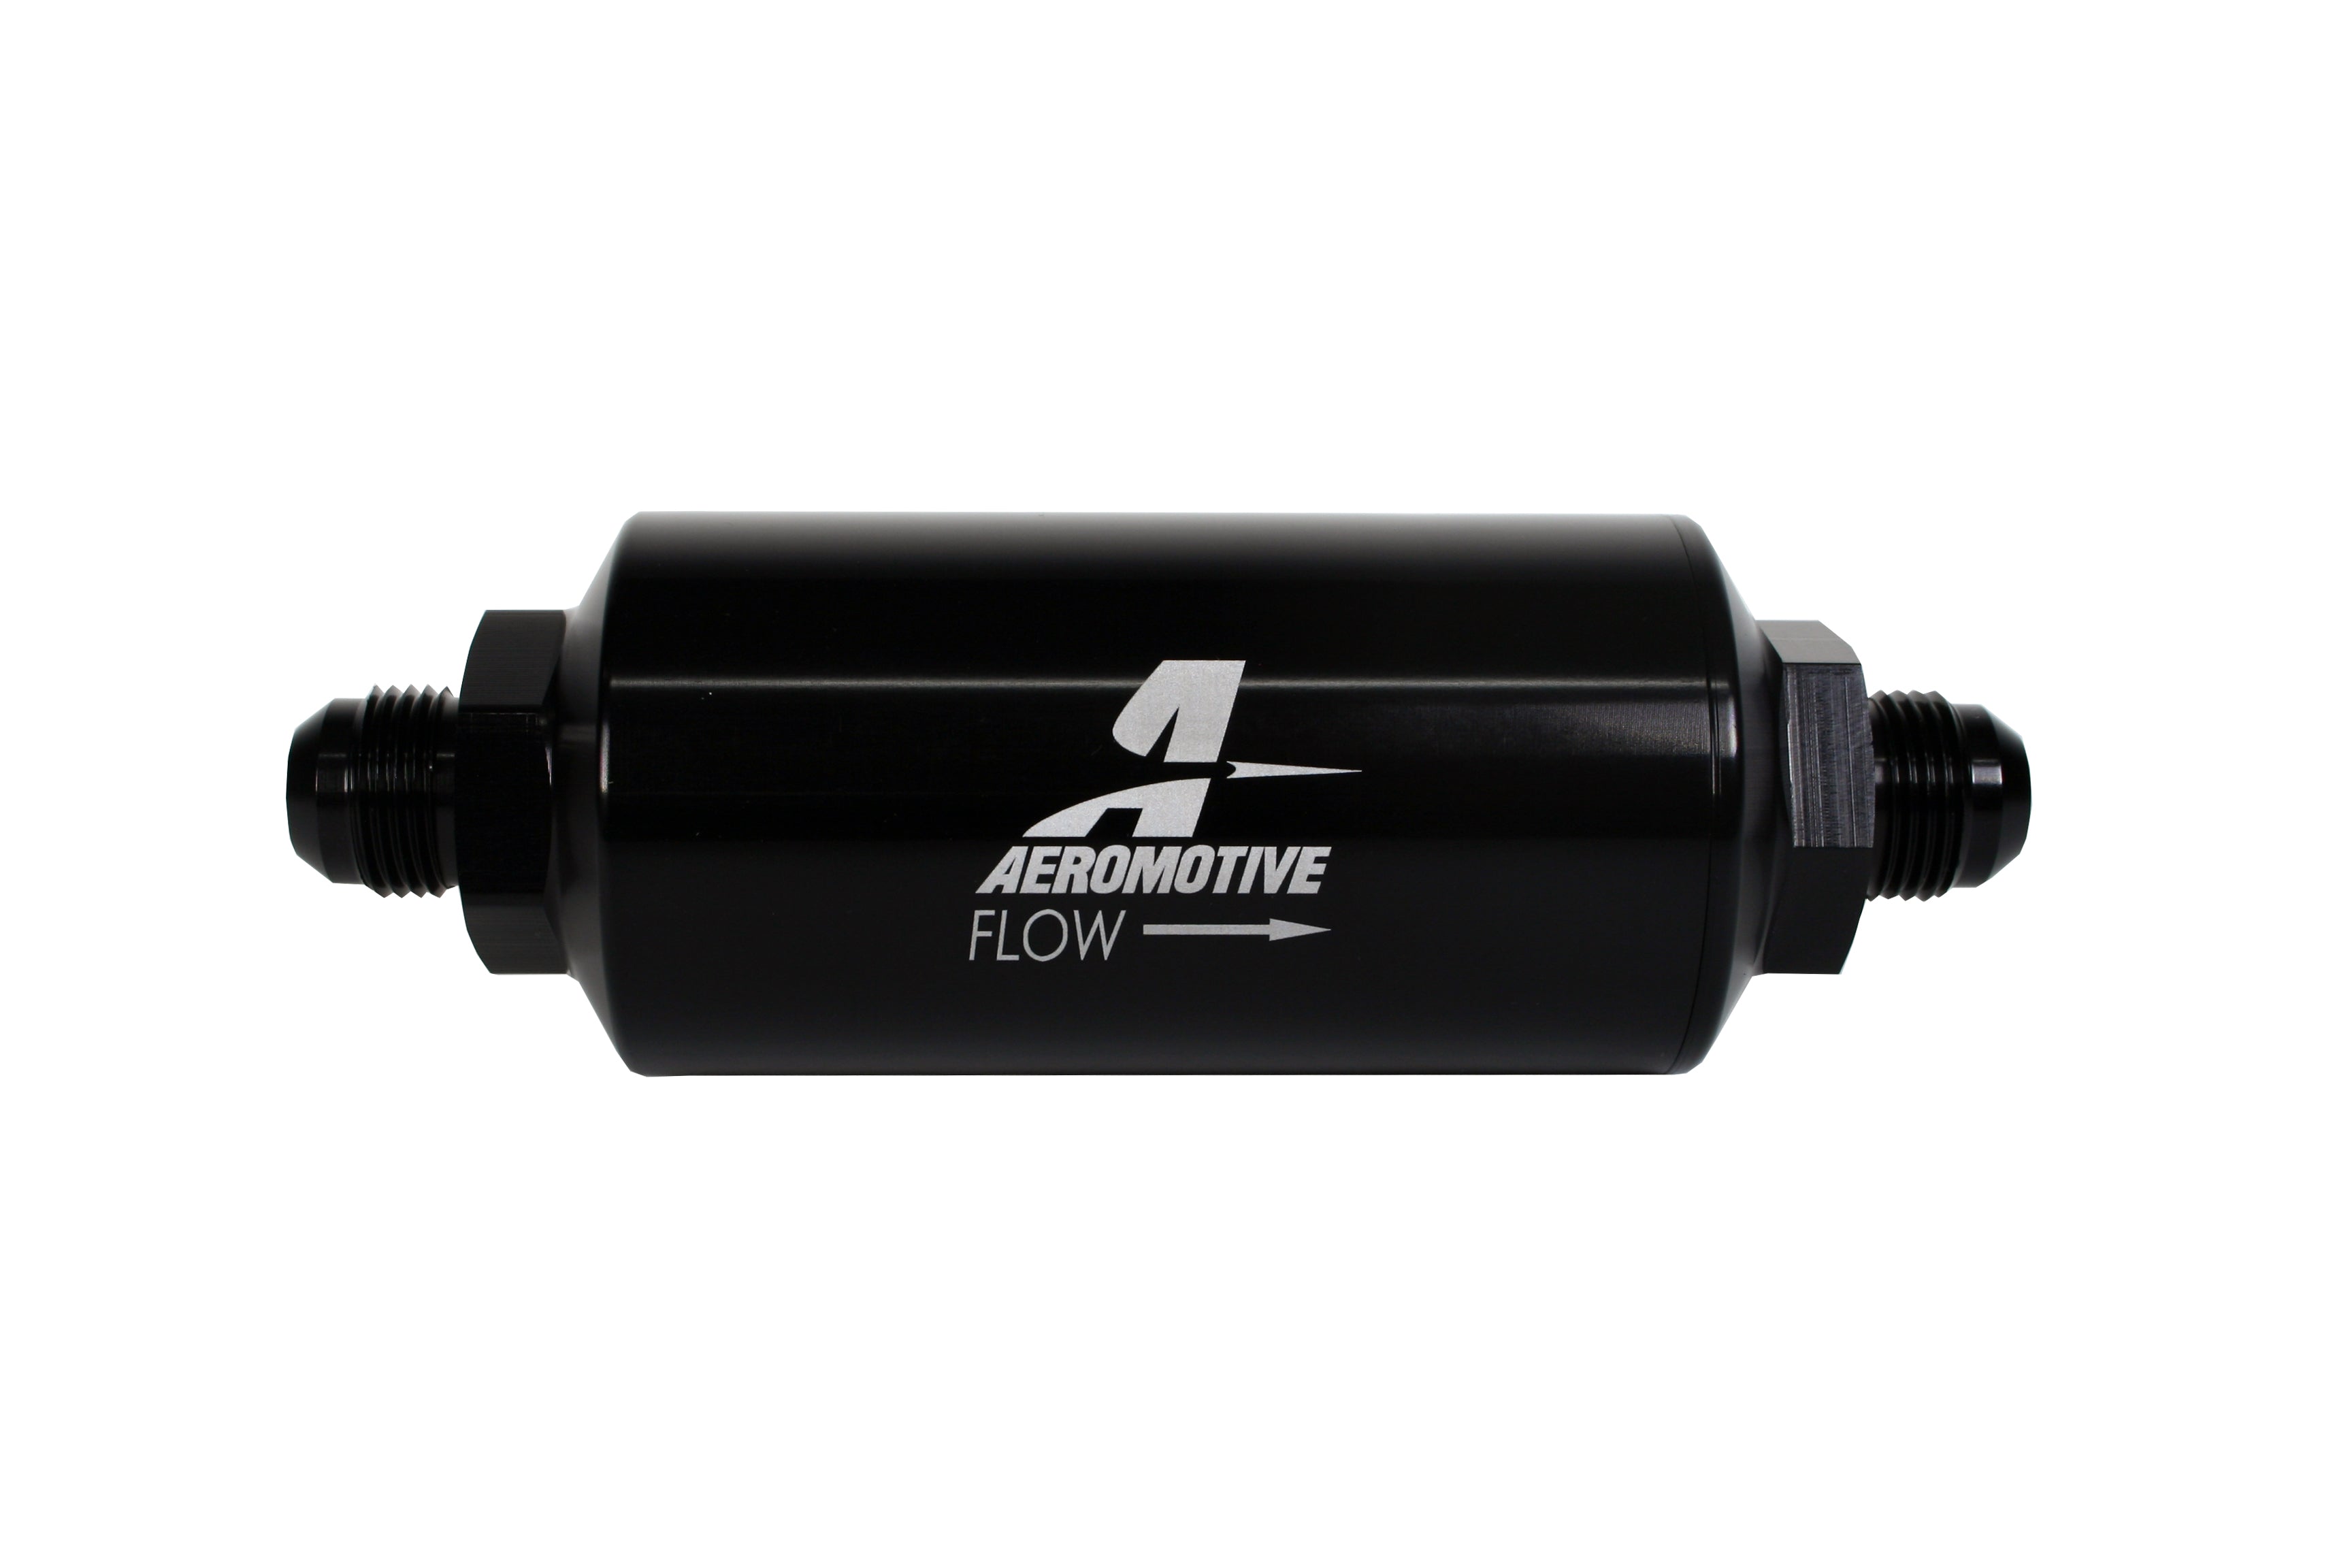 AEROMOTIVE 12378 40-Micron Stainless Steel Filter Element, black anodize finish, AN-08 Male Photo-2 